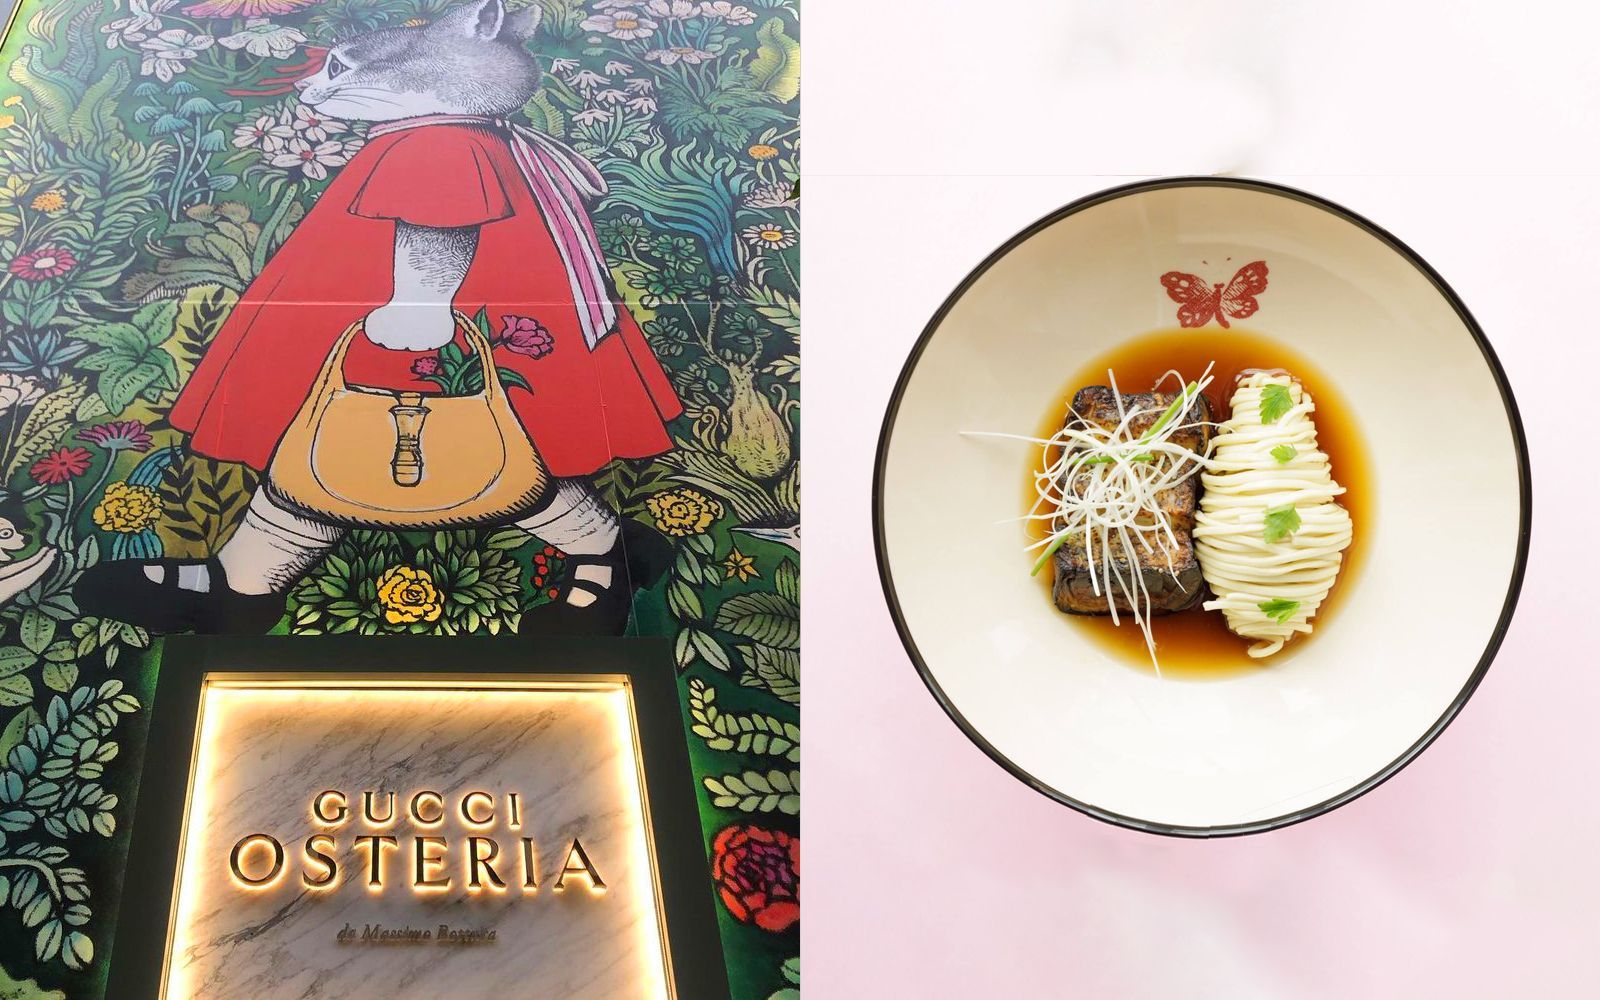 Massimo Bottura's Gucci Osteria arrives in Tokyo From October 28th at the Gucci Namiki flaghsip in Ginza